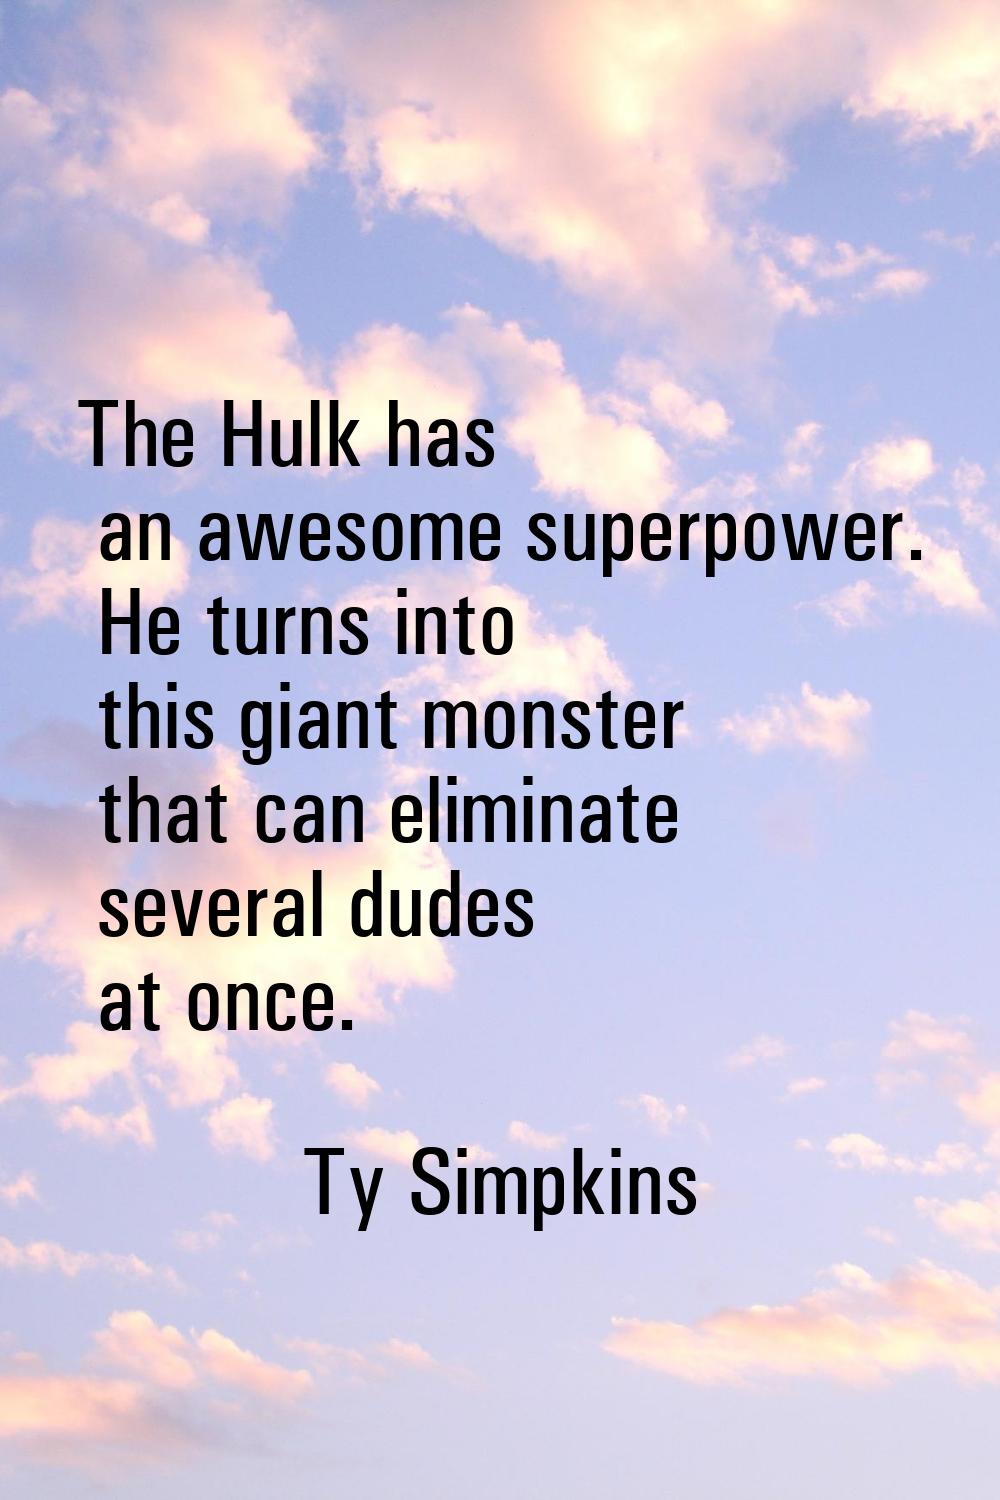 The Hulk has an awesome superpower. He turns into this giant monster that can eliminate several dud